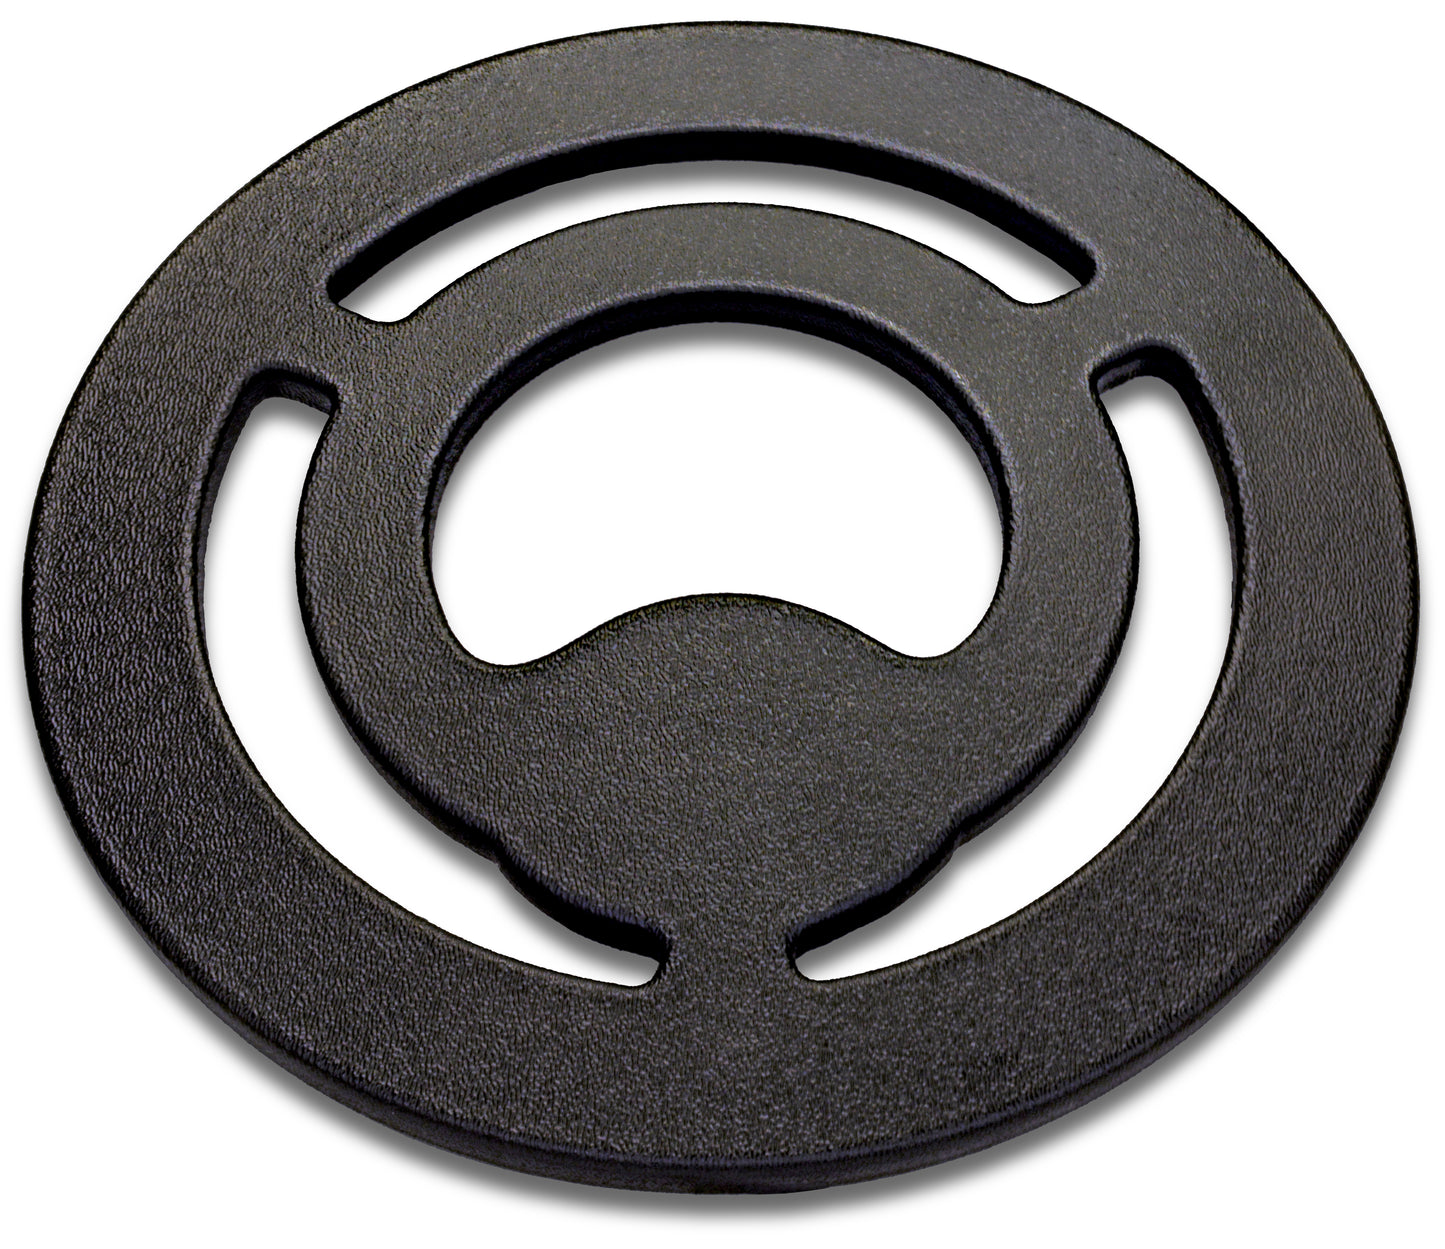 10" Coil Covers